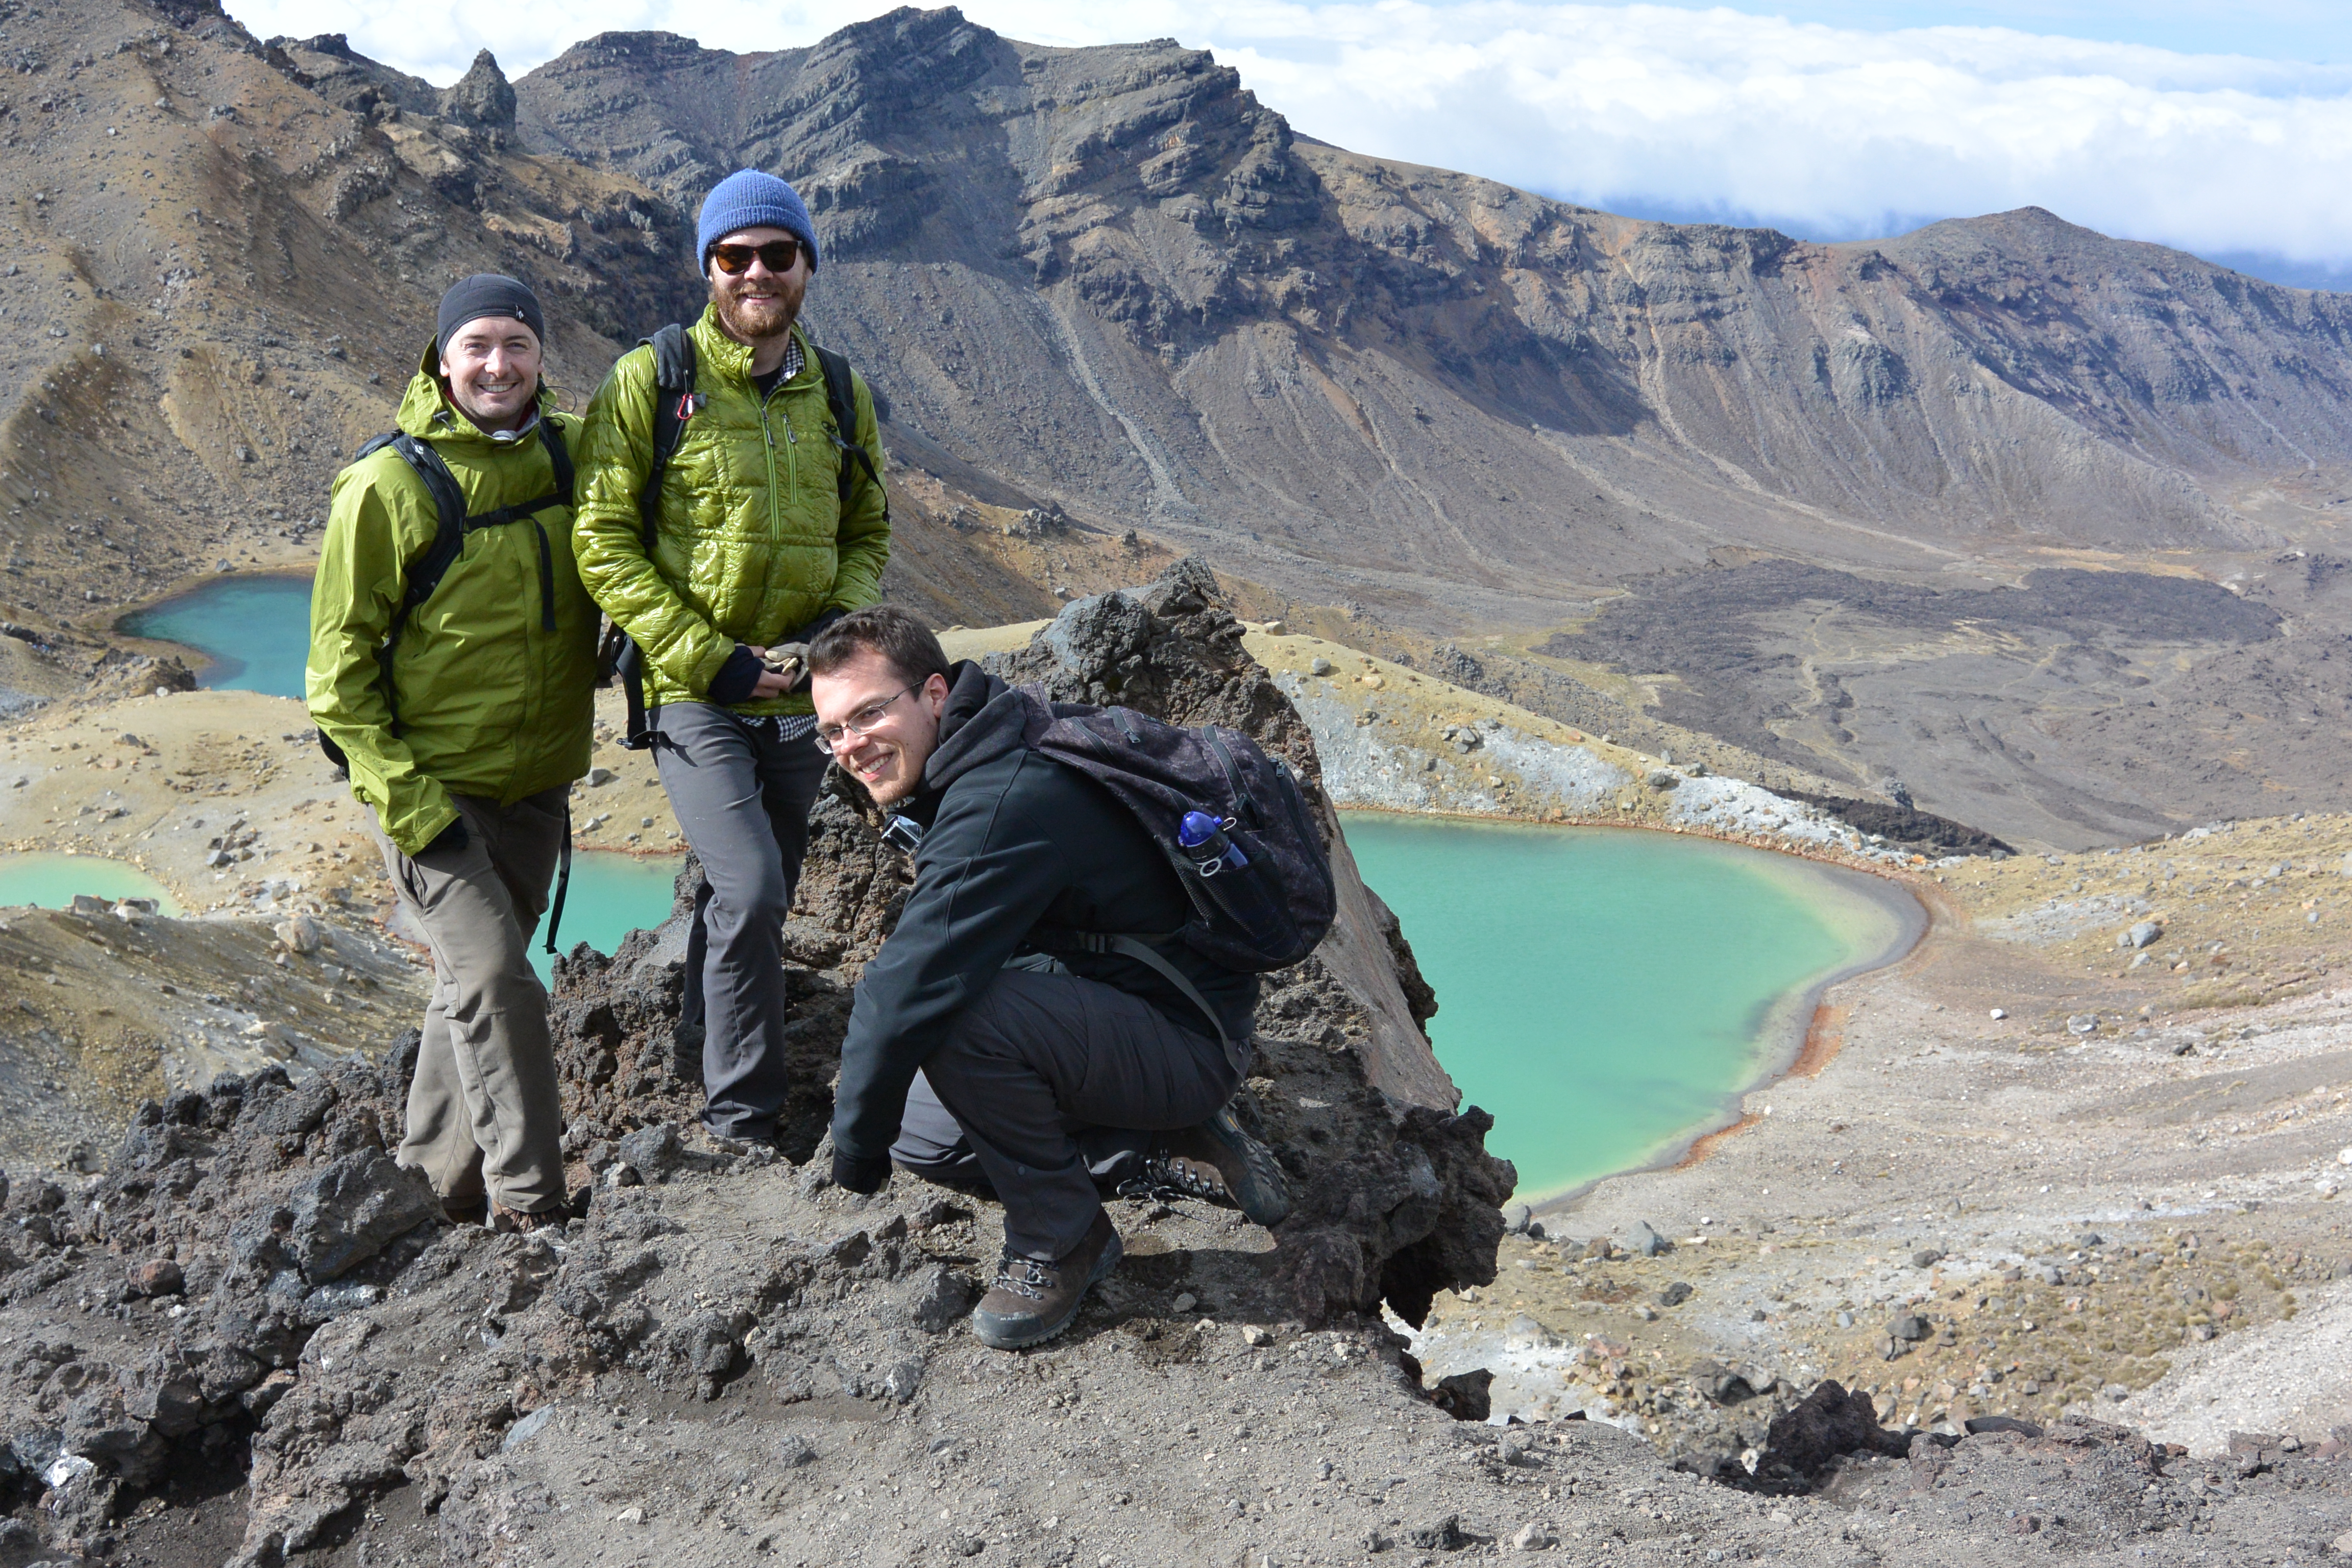  from the summit of the Tongariro Alpine crossing. Loughlin Tuck is on the left, Greenman is in the middle and Michael Thompson is crouching.